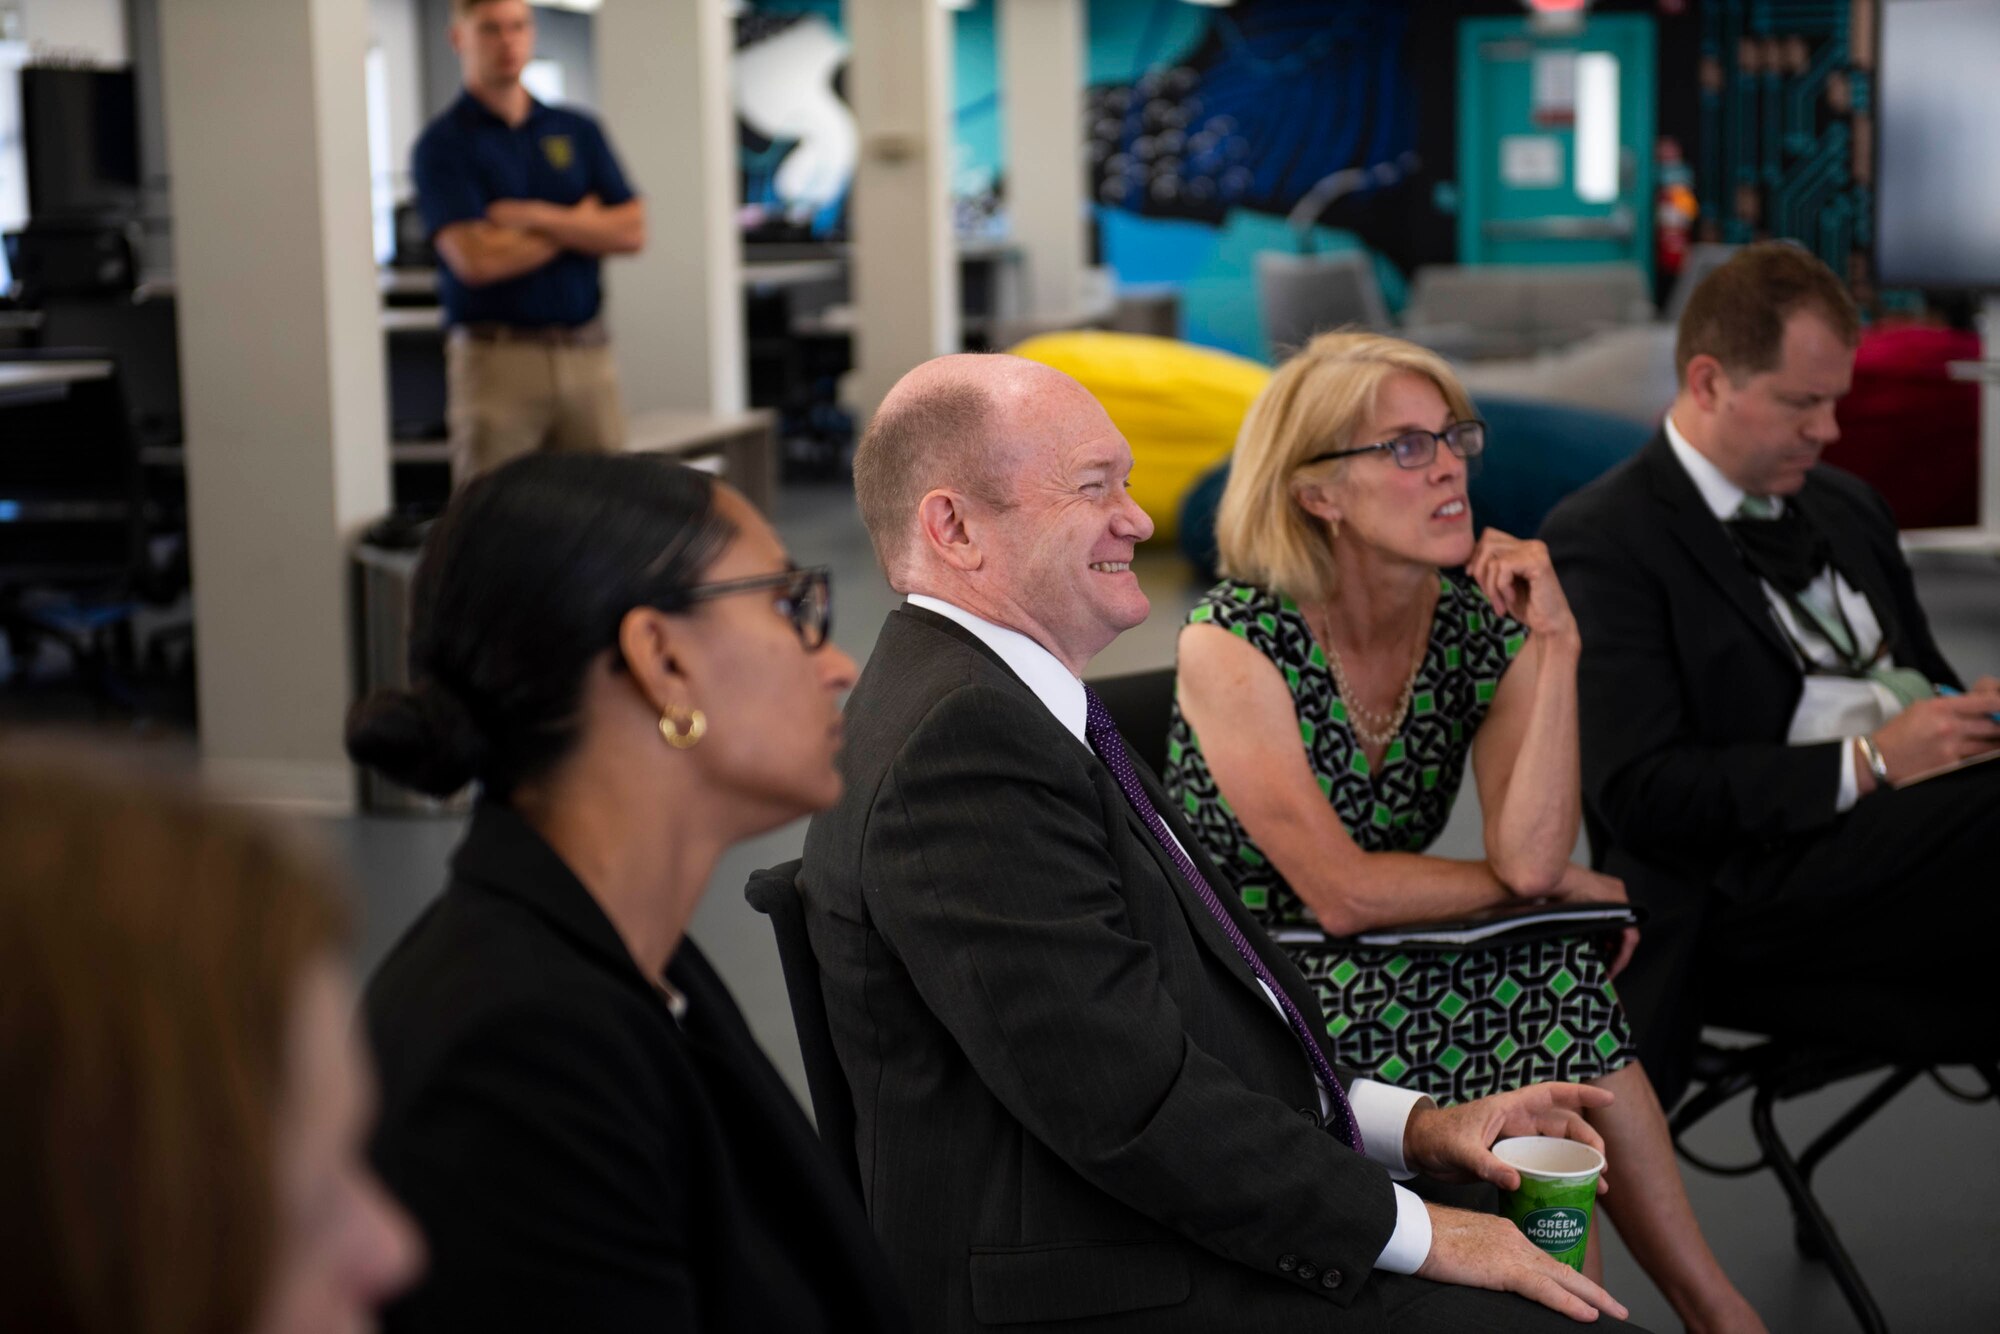 U.S. Sen. Chris Coons, smiles during a brief at Dover Air Force Base, Delaware, June 10, 2022. Coons visited Dover AFB’s SPARK hub, BEDROCK. BEDROCK is Dover’s foundation for innovation, designed to leverage technology and off-the-shelf solutions to fix the military’s problems and bridge the gap between Dover's Airmen and industry experts. (U.S. Air Force photo by Tech. Sgt. J.D. Strong II)